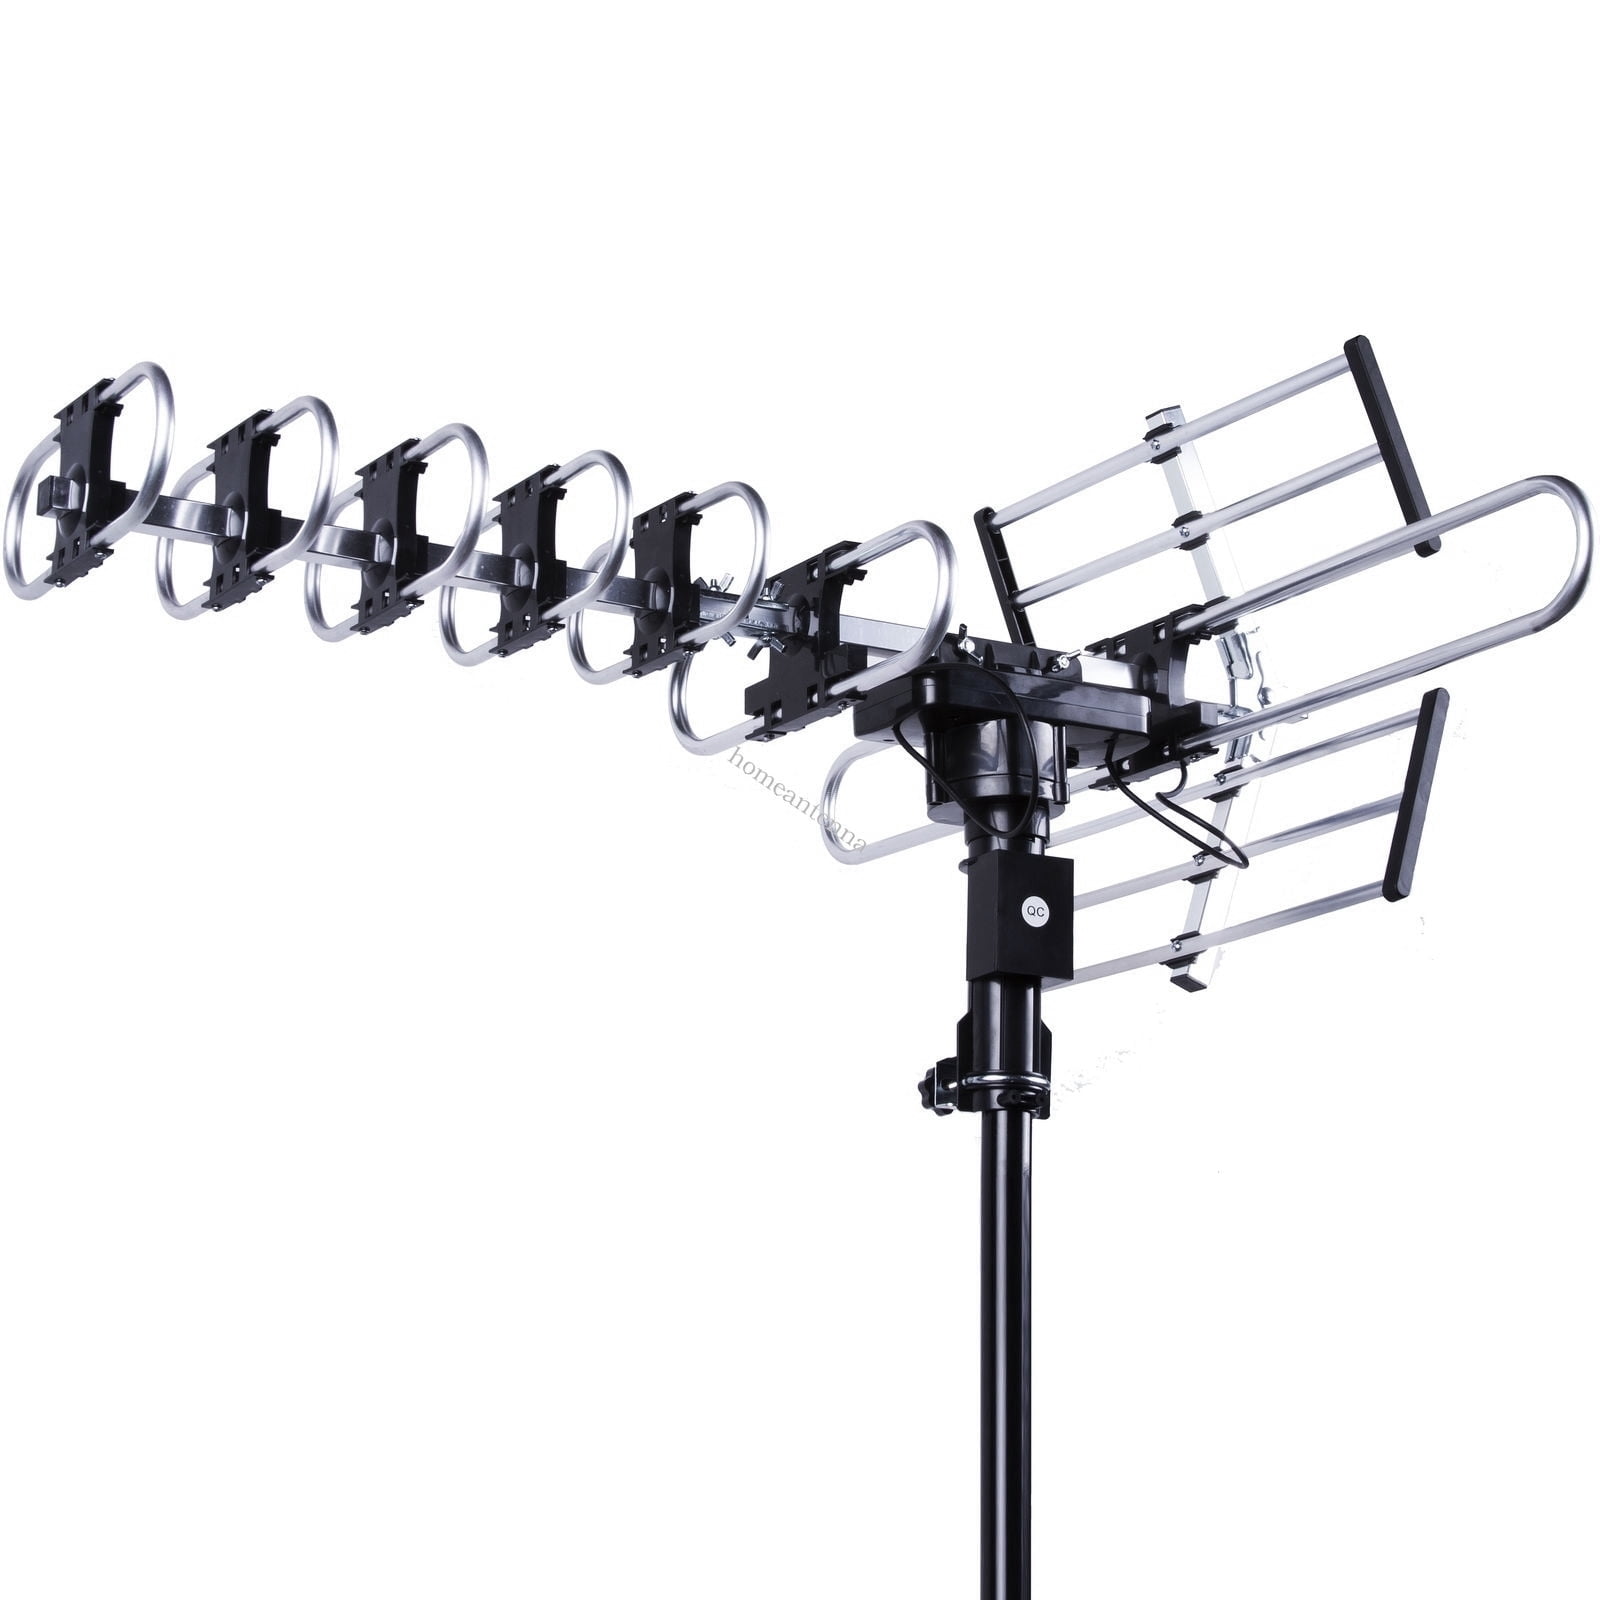 1080P 4K Outdoor Digital HD TV Antenna 360 Degrees Rotation 150 Mile Range Receive UHF VHF FM Signal with Remote Controller COMOTS HDTV Antenna 